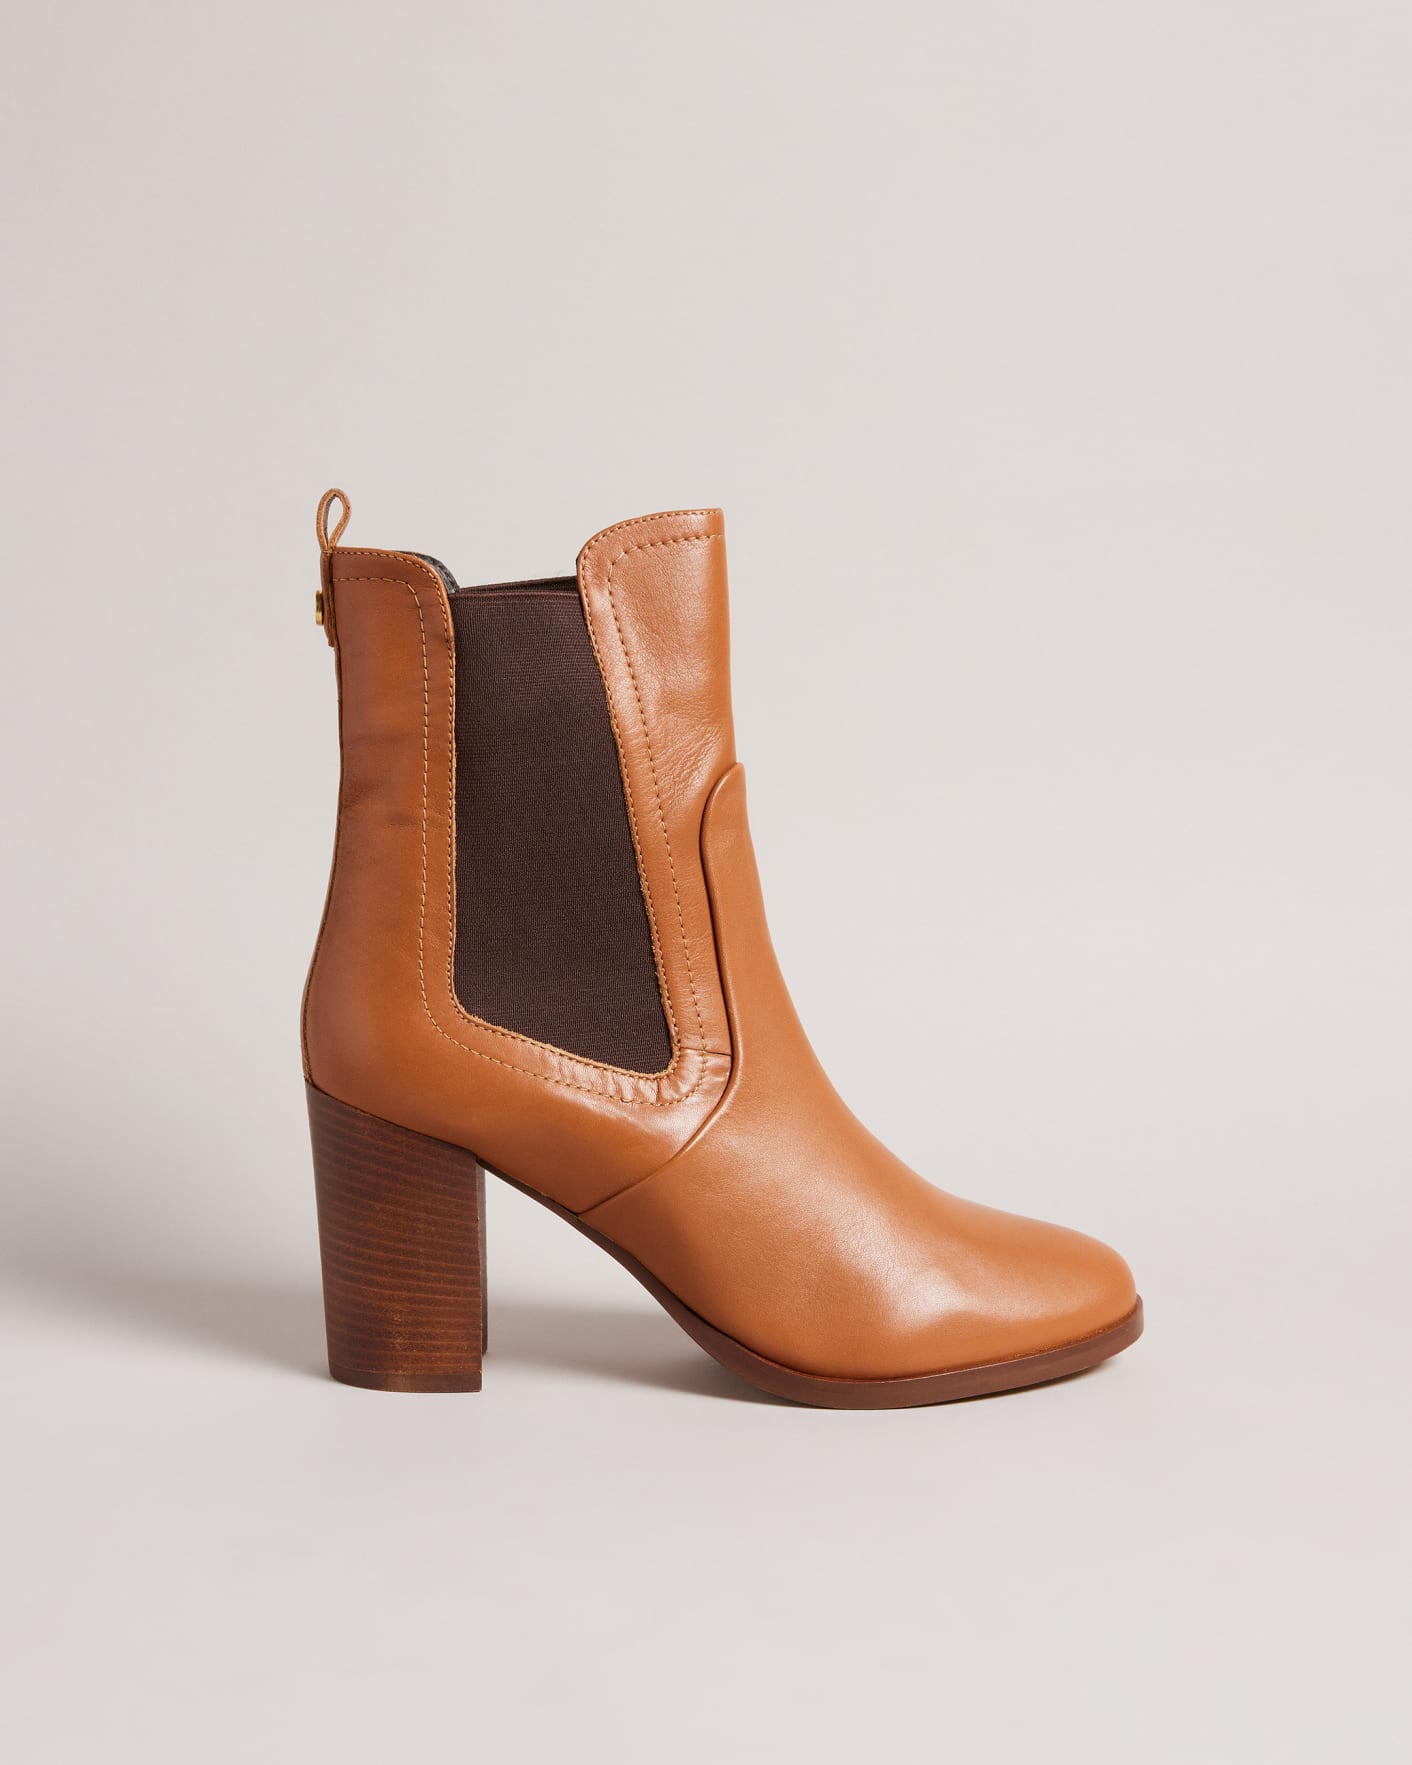 DAPHINA - TAN Boots Ted Baker US